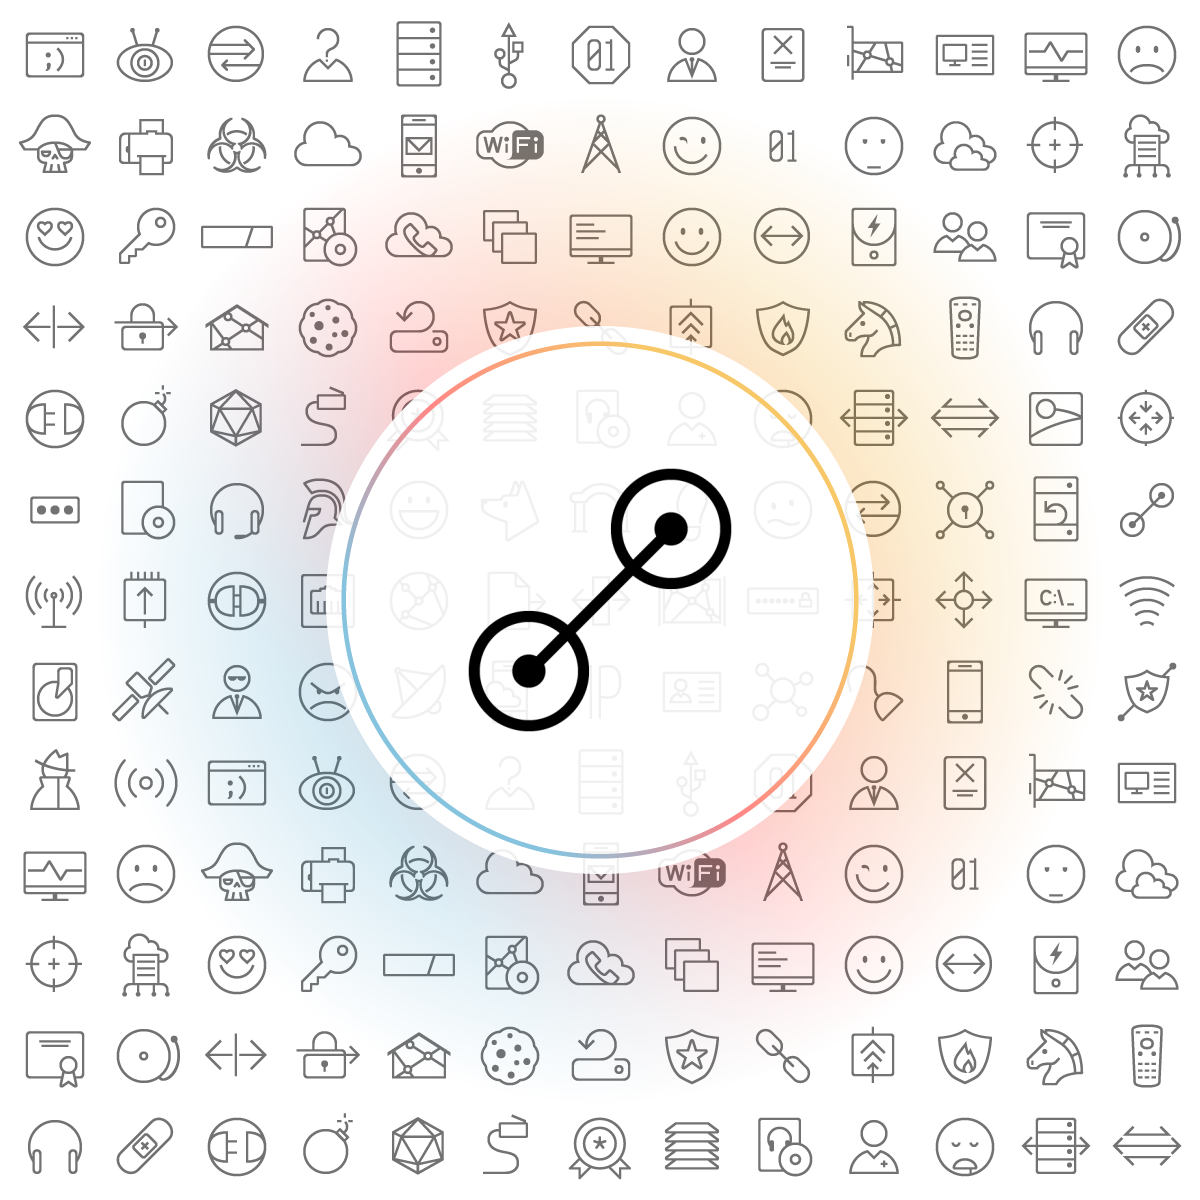 Network topology Icons - Iconshock